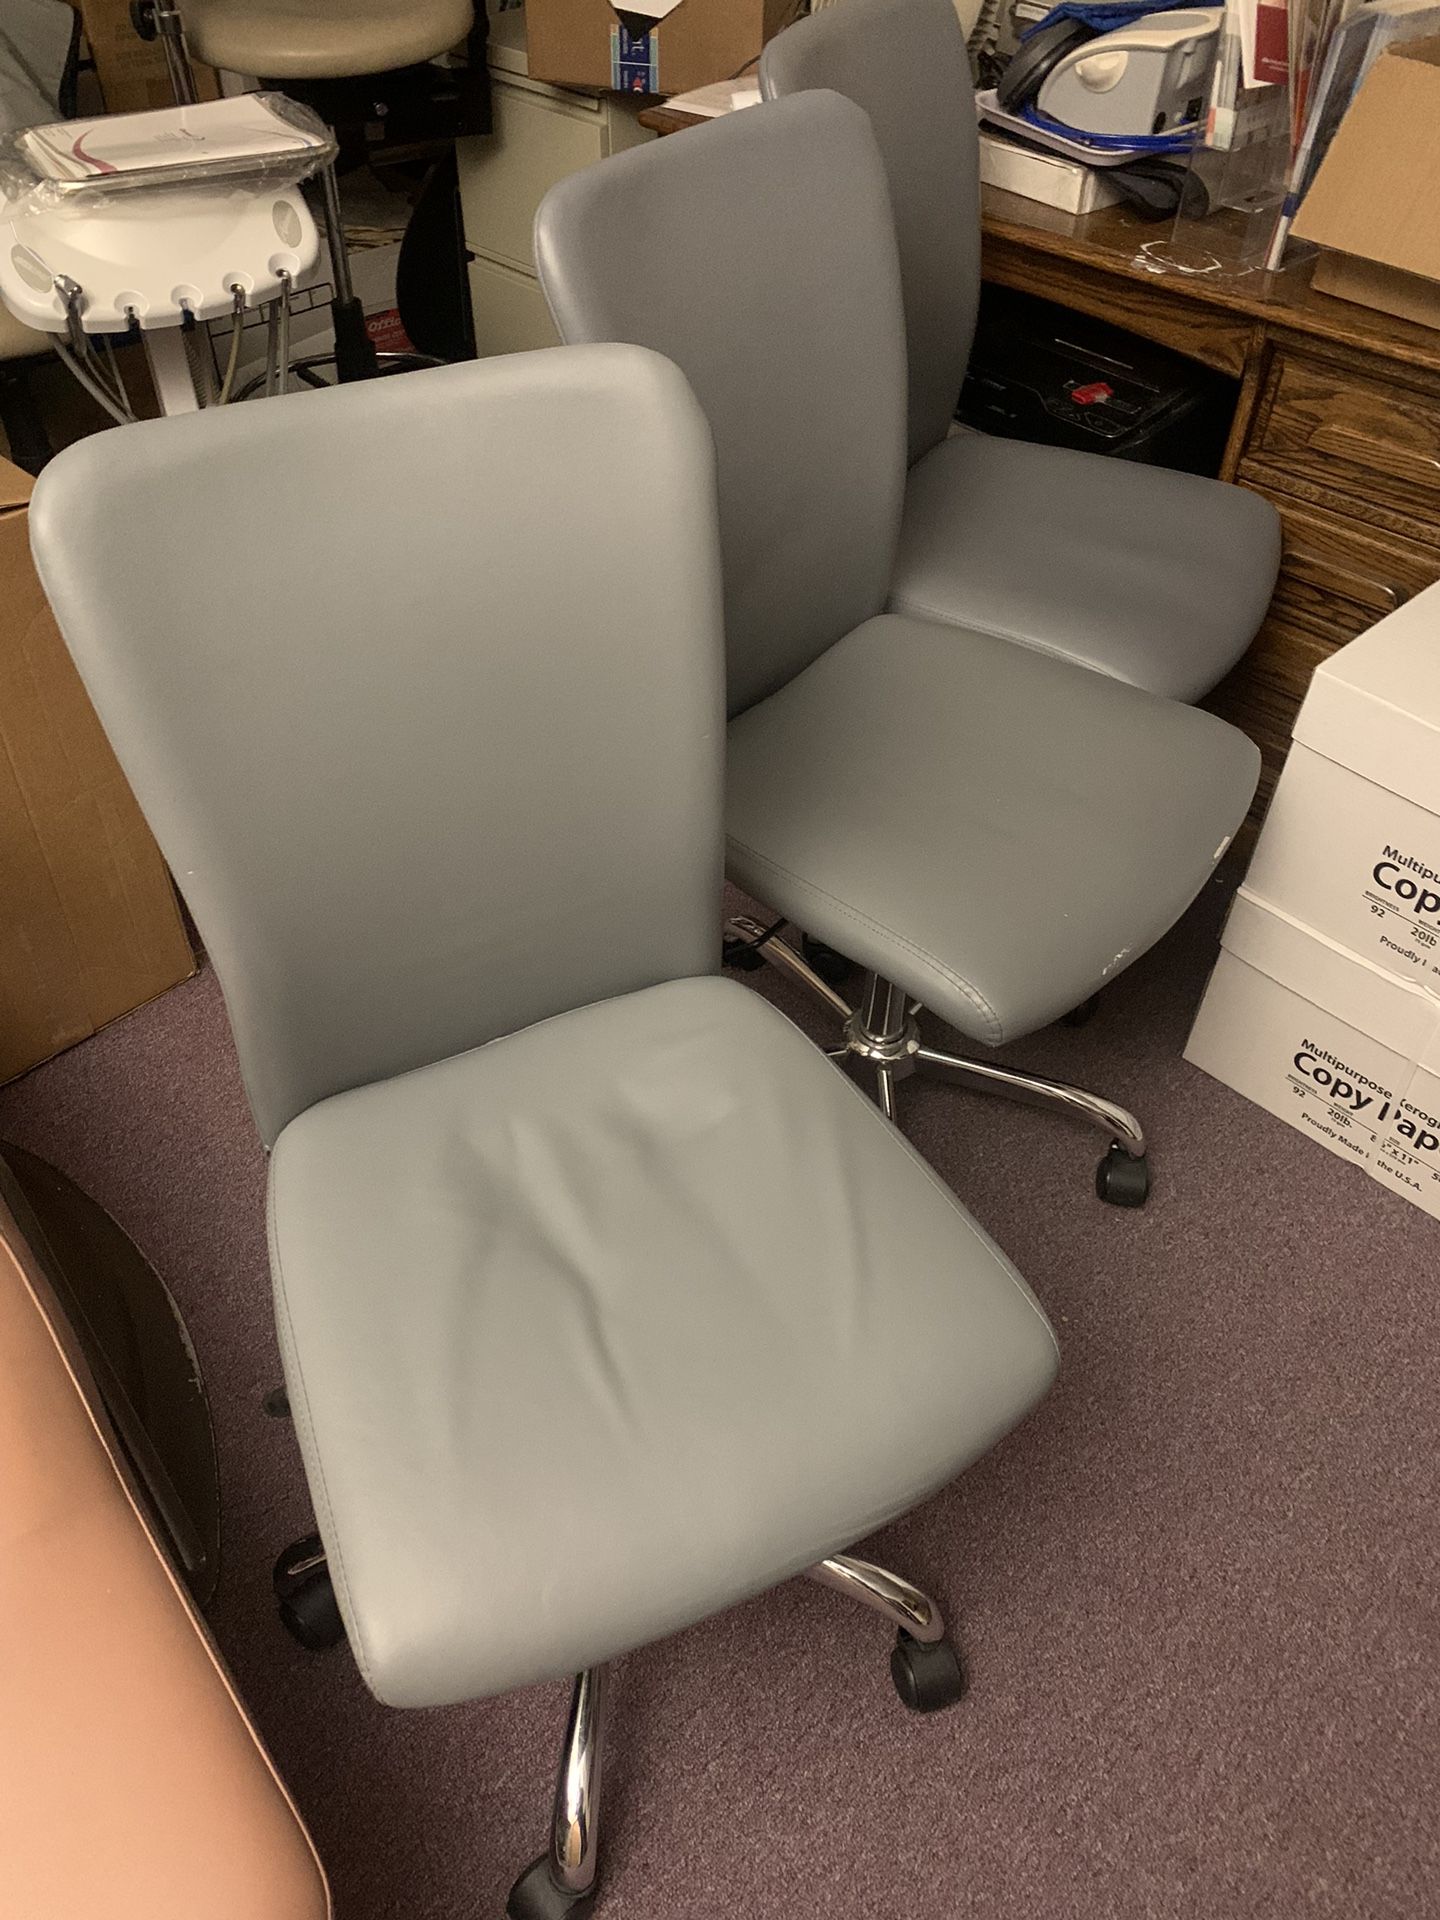 Free OfficeMax Office Chairs